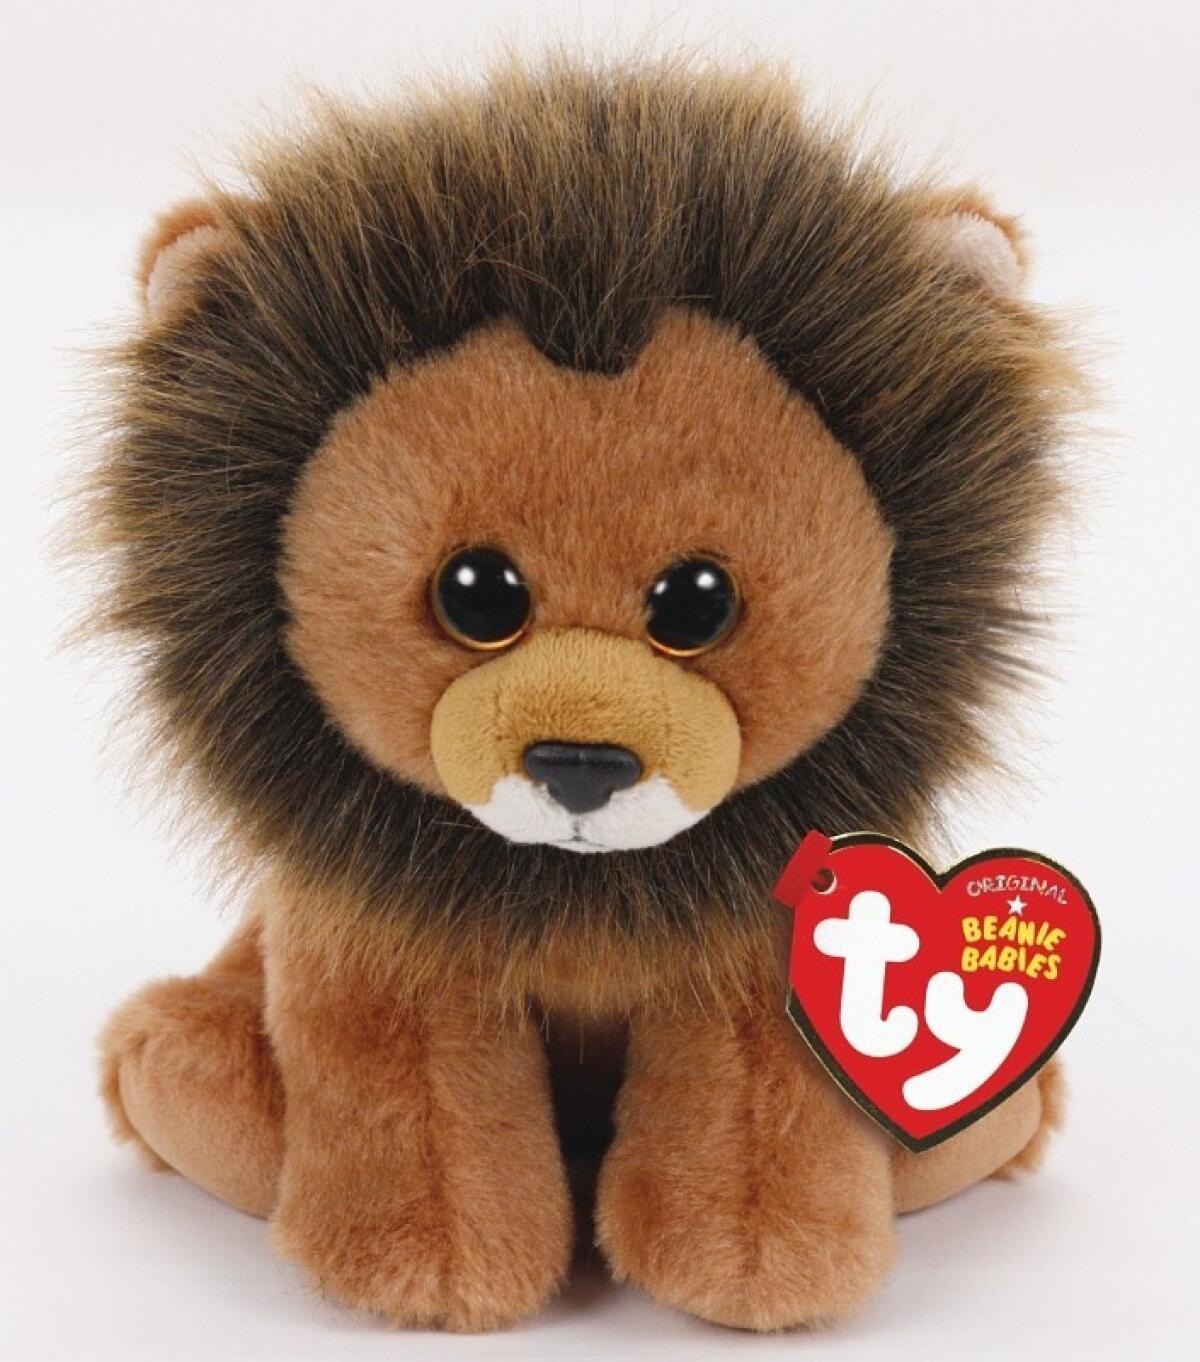 Ty Warner introduces Cecil the Lion Beanie Baby - 100% of profits from the original sale to WildCRU, the Wildlife Conservation Research Unit of University of Oxford in Oxford England. (PRNewsFoto/Ty Inc.)